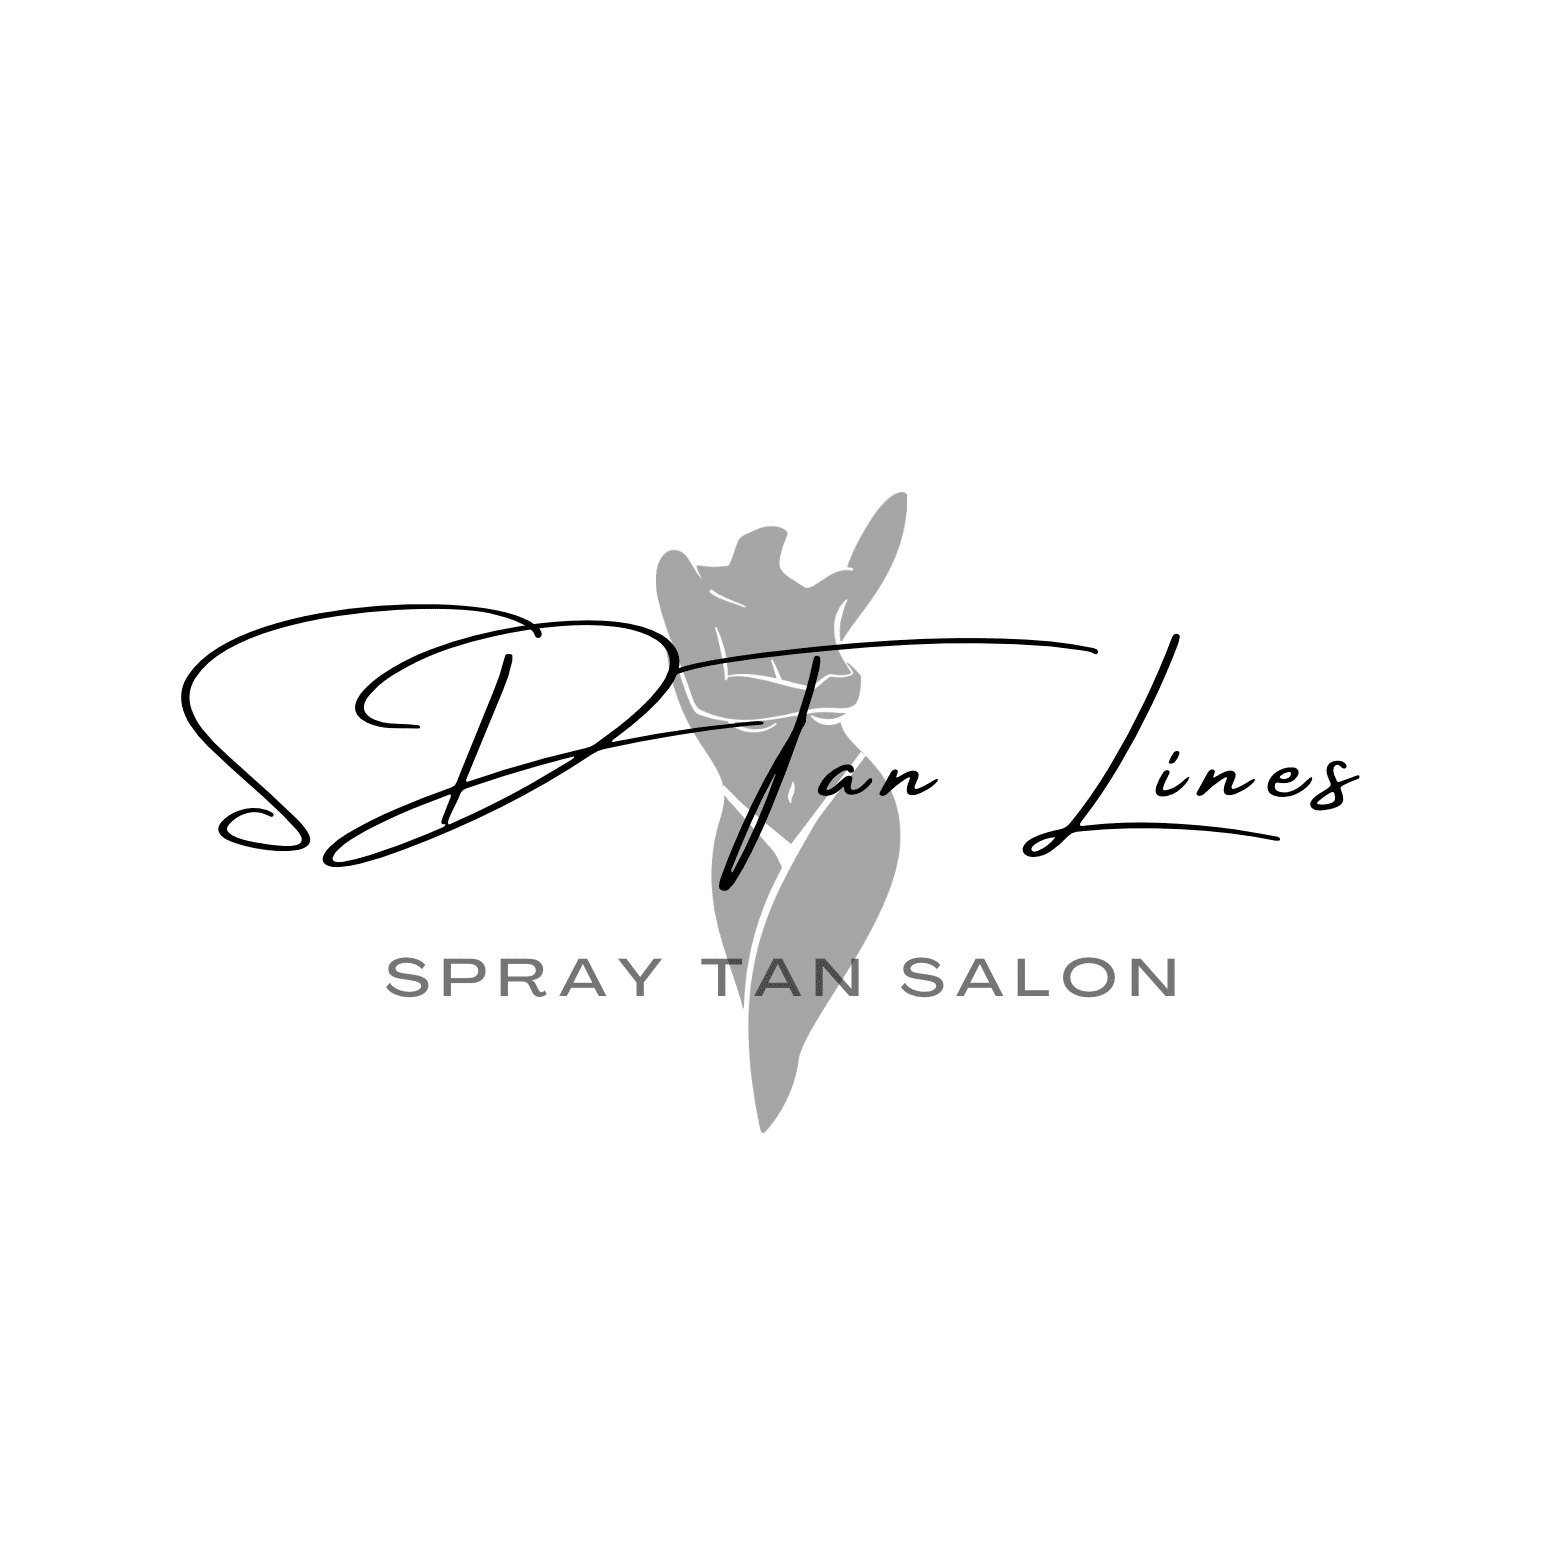 Logo of "d'artagnan lines spray tan salon" featuring stylized typography and an abstract figure.